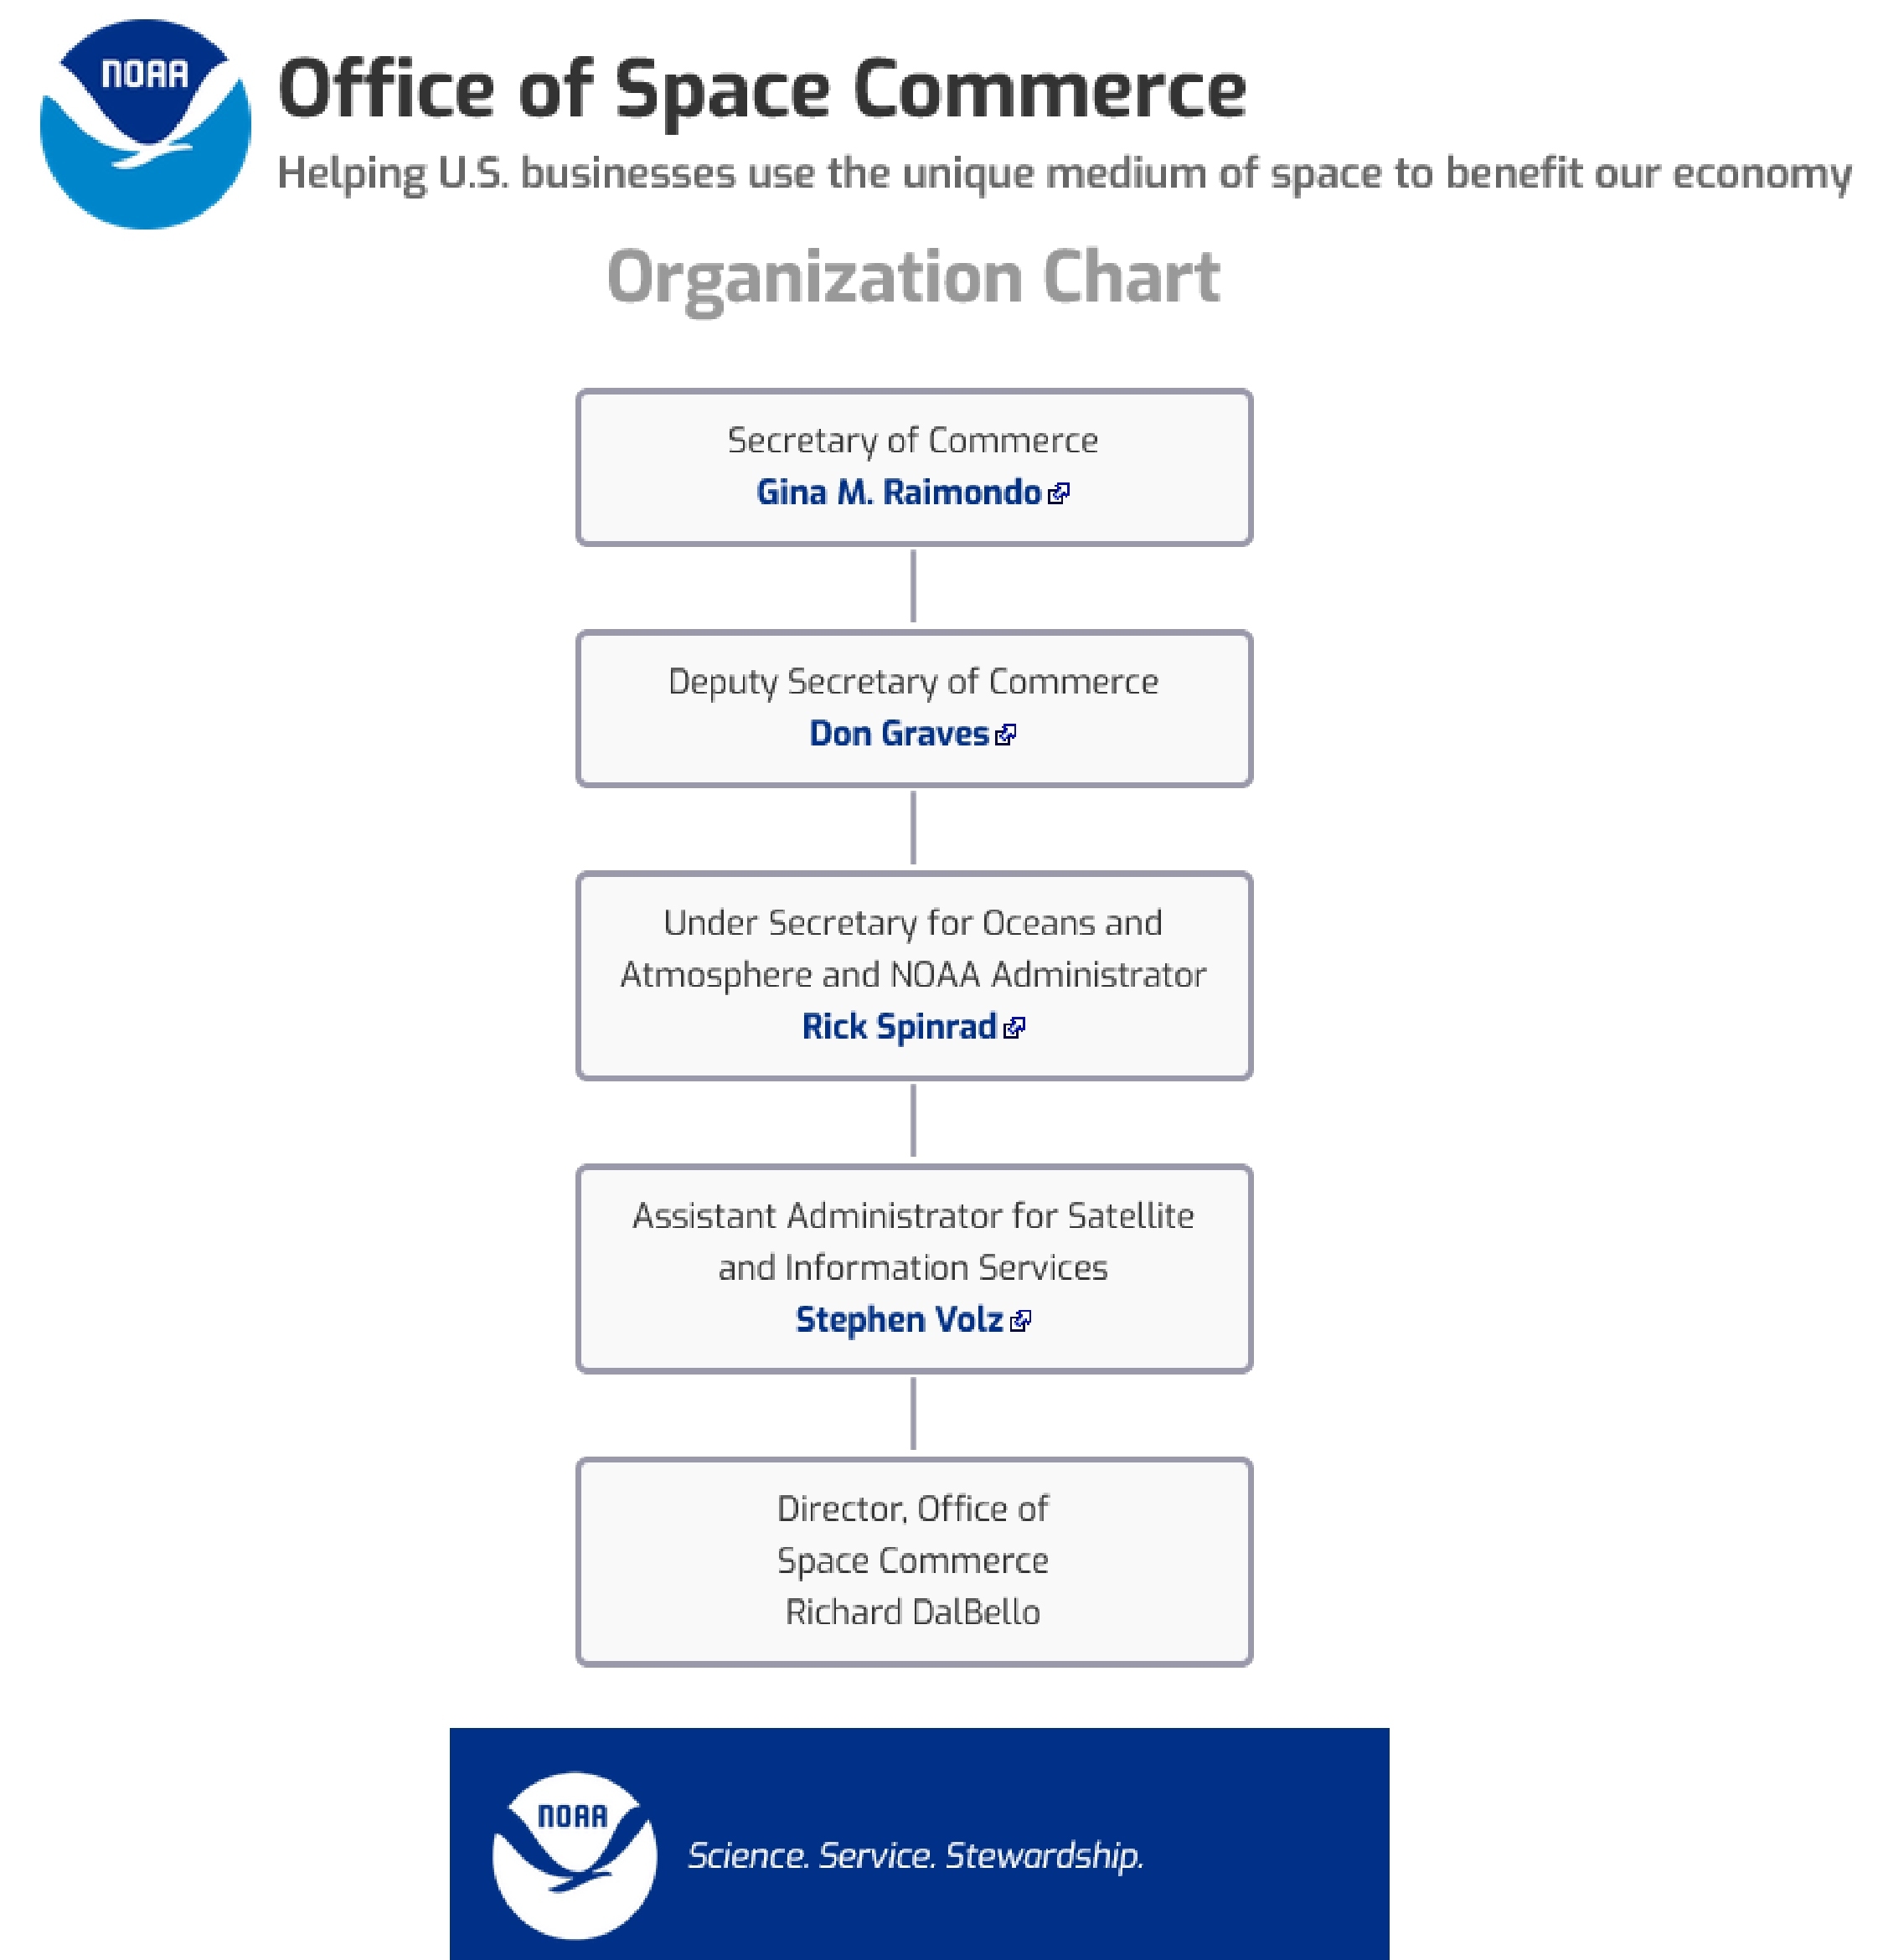 Office of Space Commerce